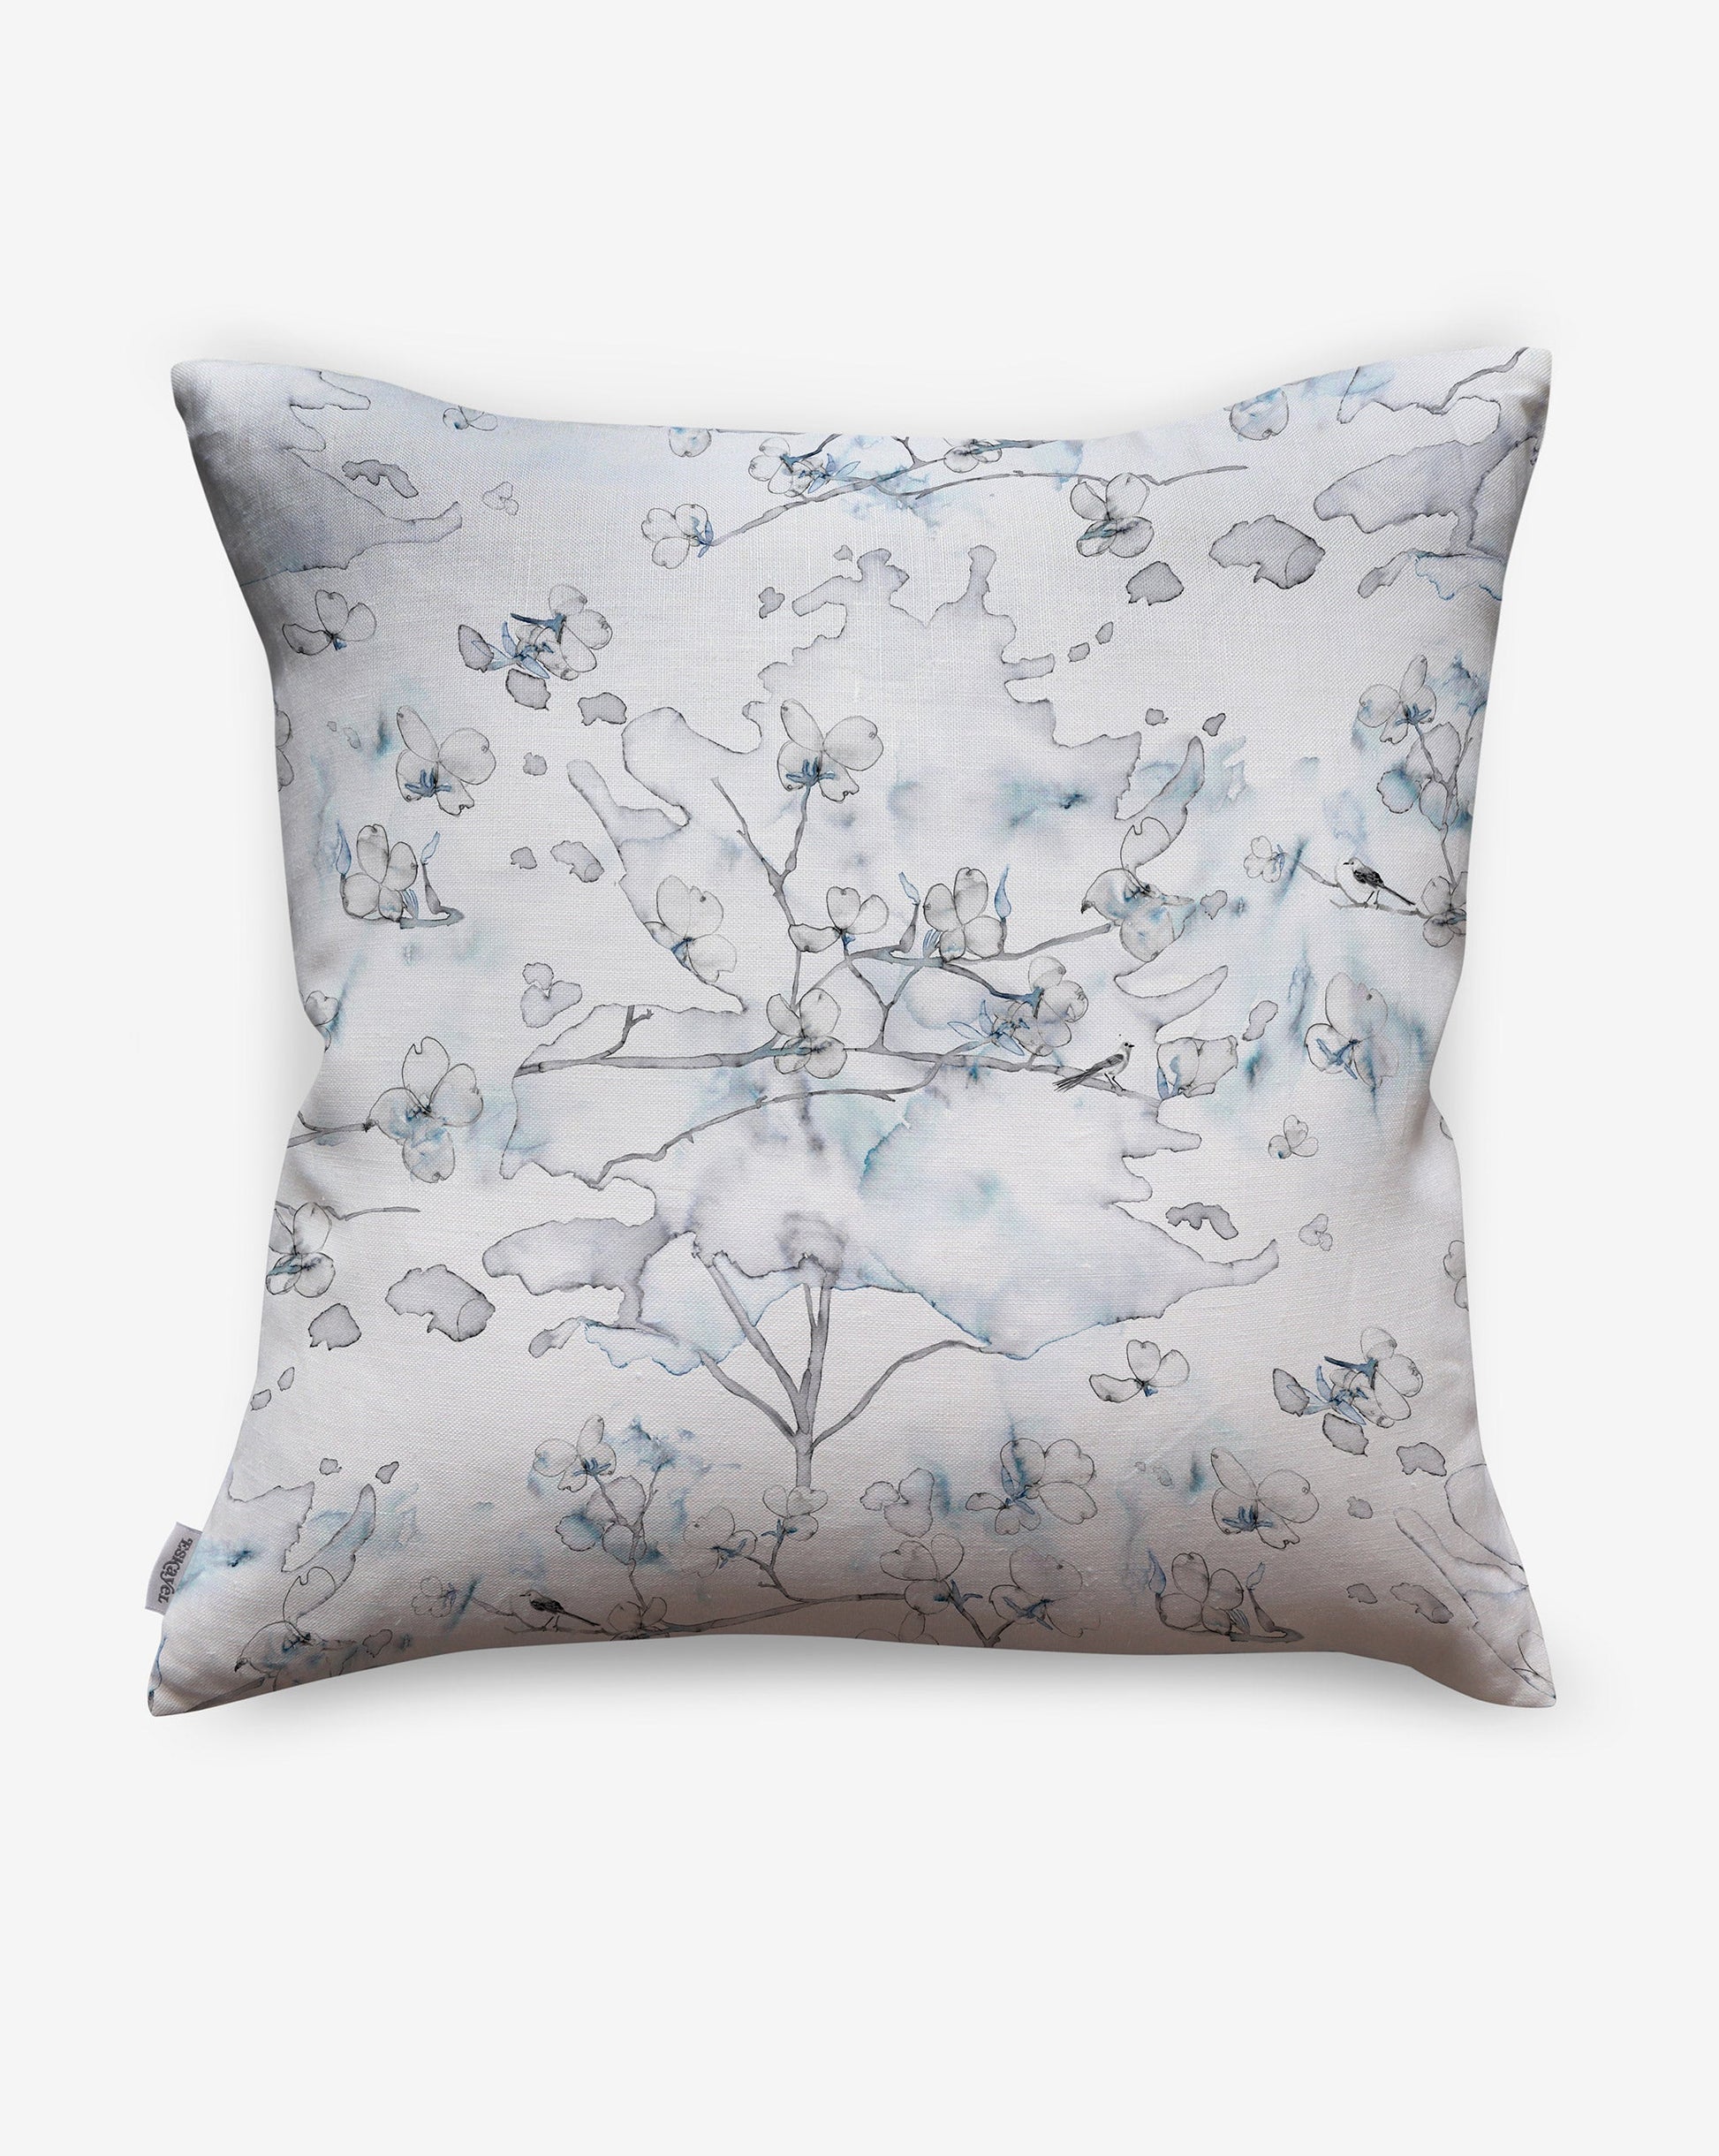 Dogwood Dreams pillows in the blue Indigo colorway take inspiration from East Coast scenes in spring.